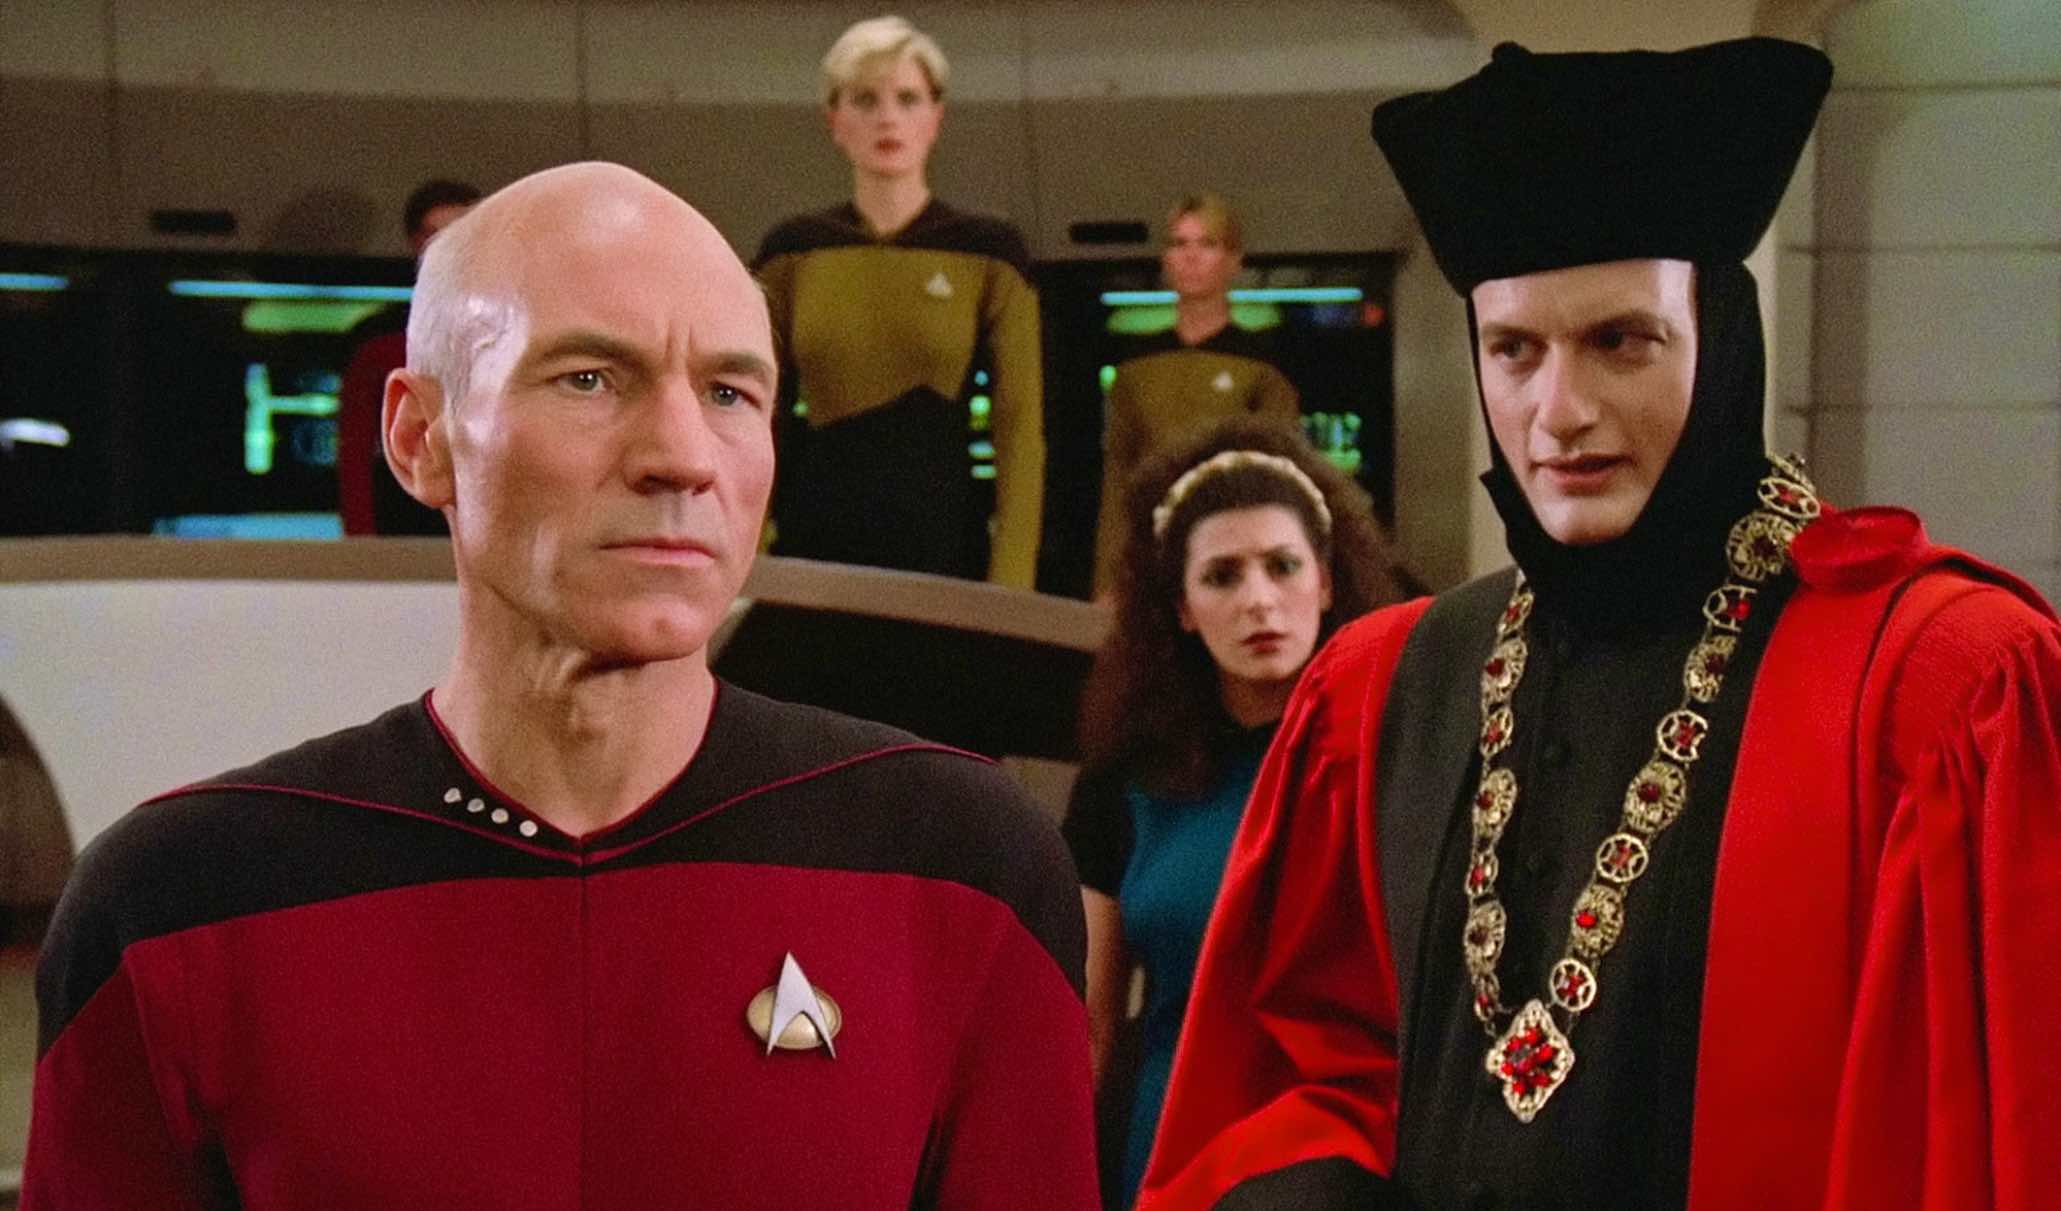 John de Lancie in his judge costume from the Star Trek: The Next Generation episode “Encounter at Farpoint” faces Jean-Luc Picard